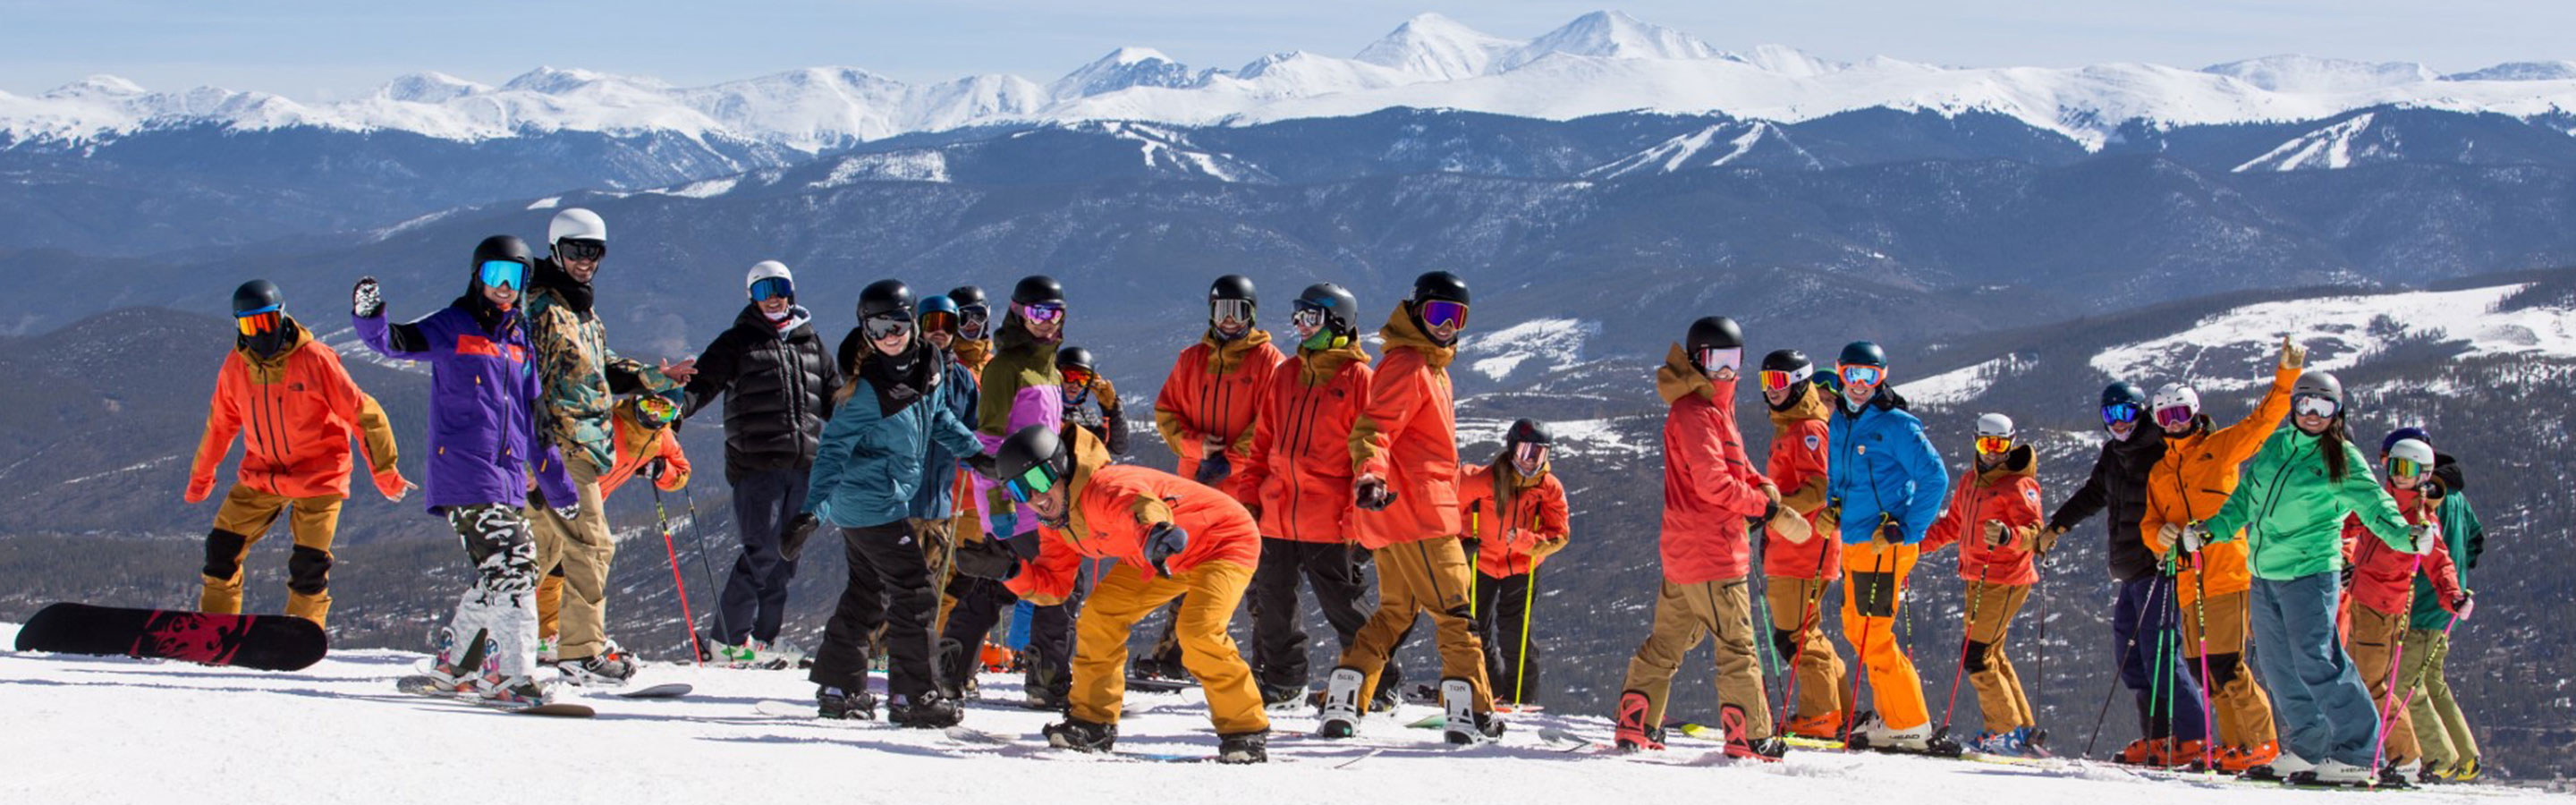 skiers and snowboarders on a snowy mountain 